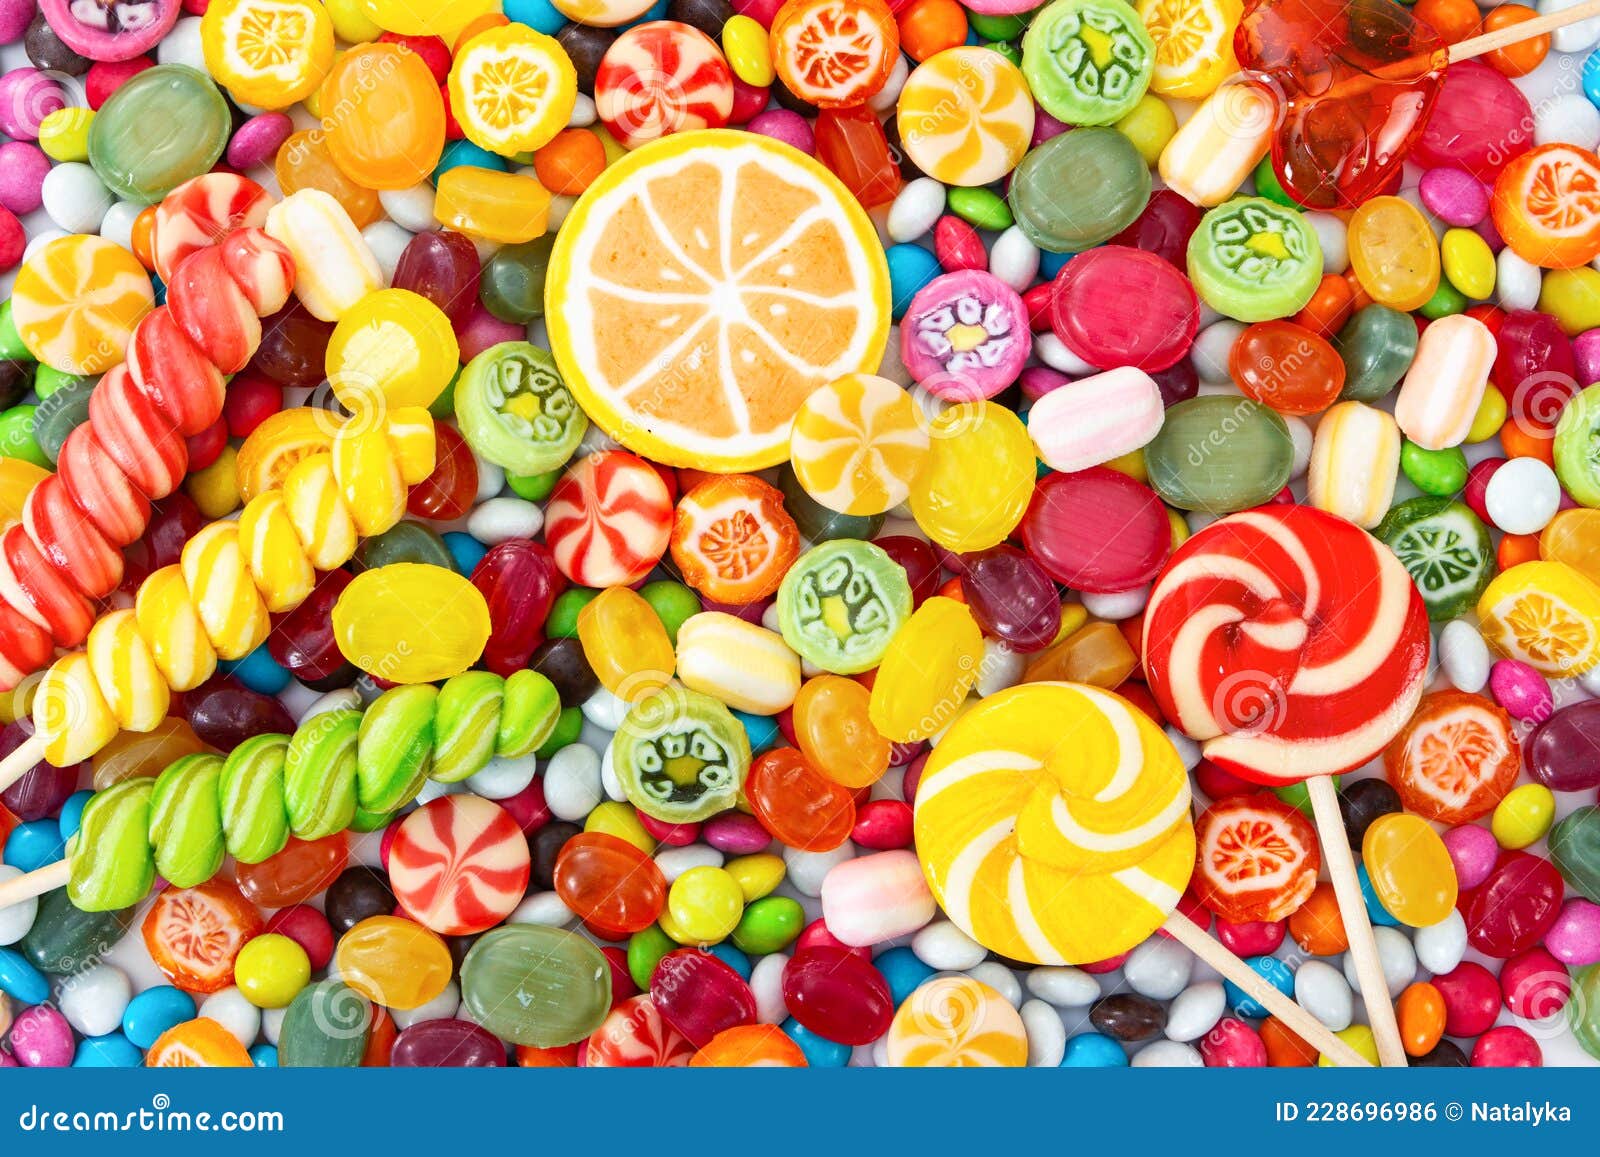 Colorful Lollipops and Different Colored Round Candy Stock Photo ...